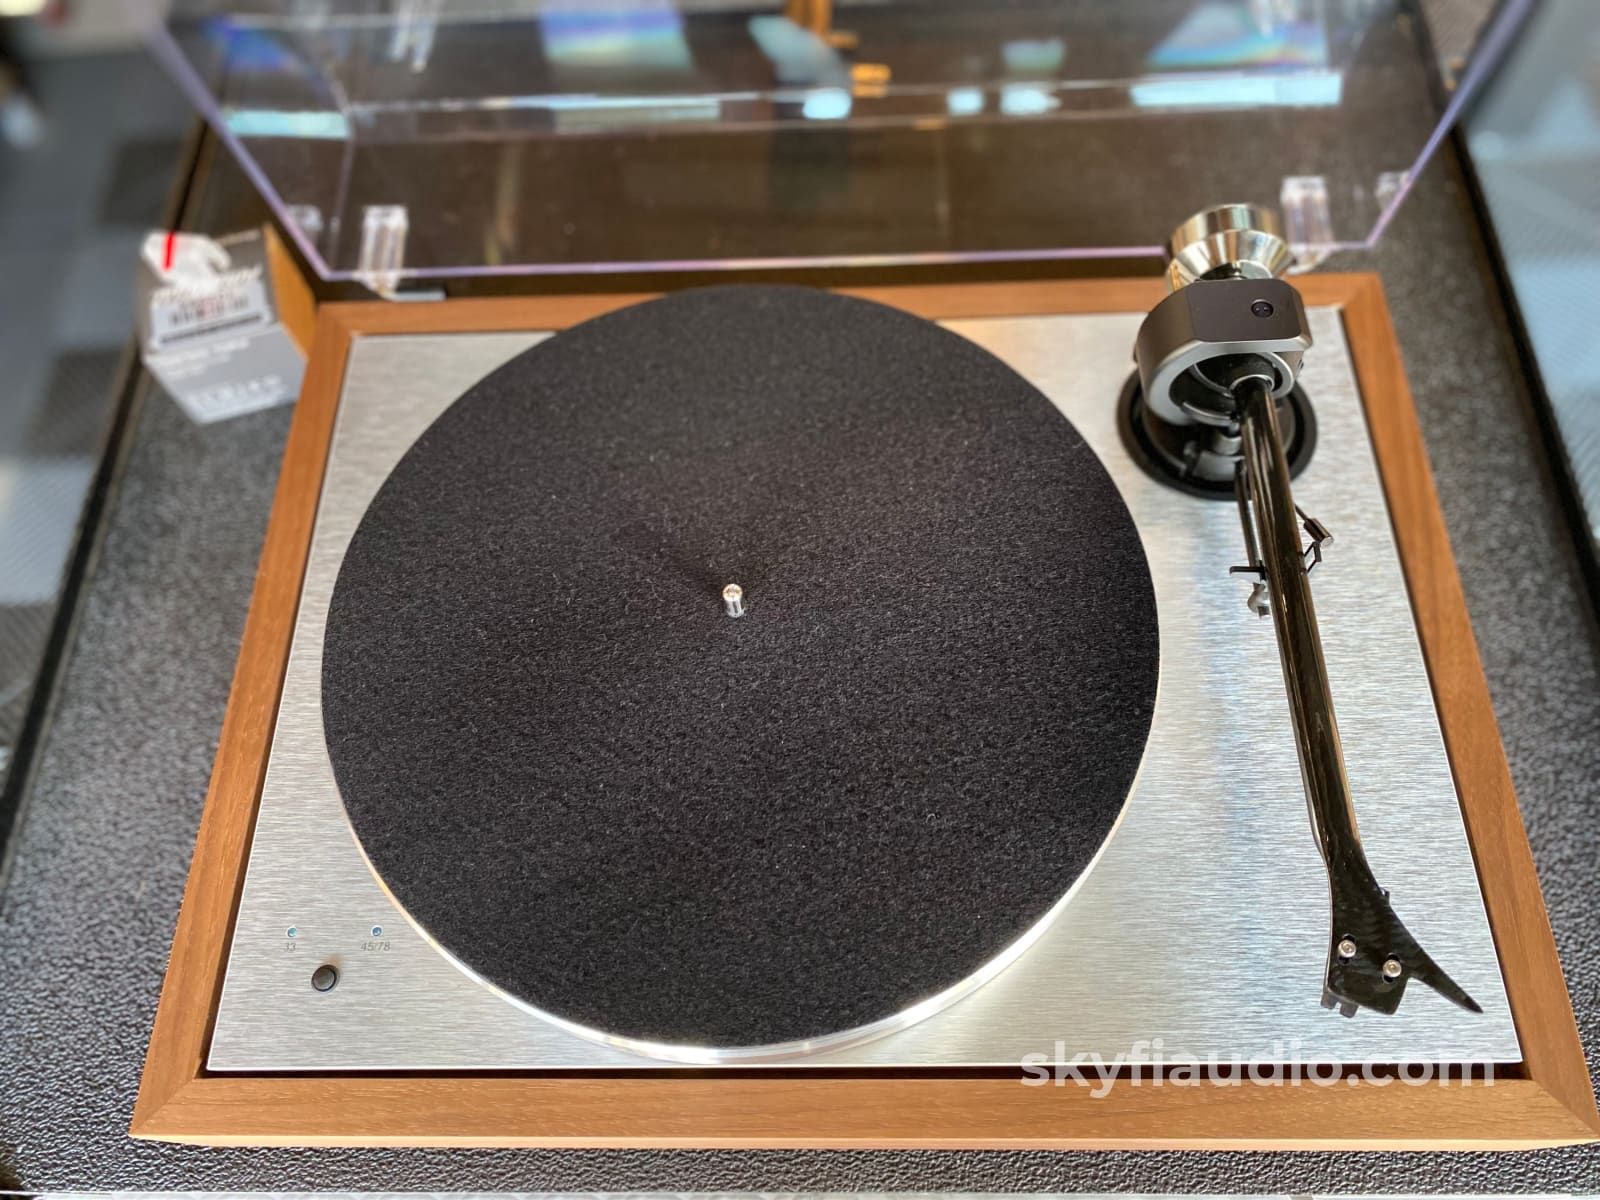 A modern Classic – the 'retro' Pro-Ject turntable –